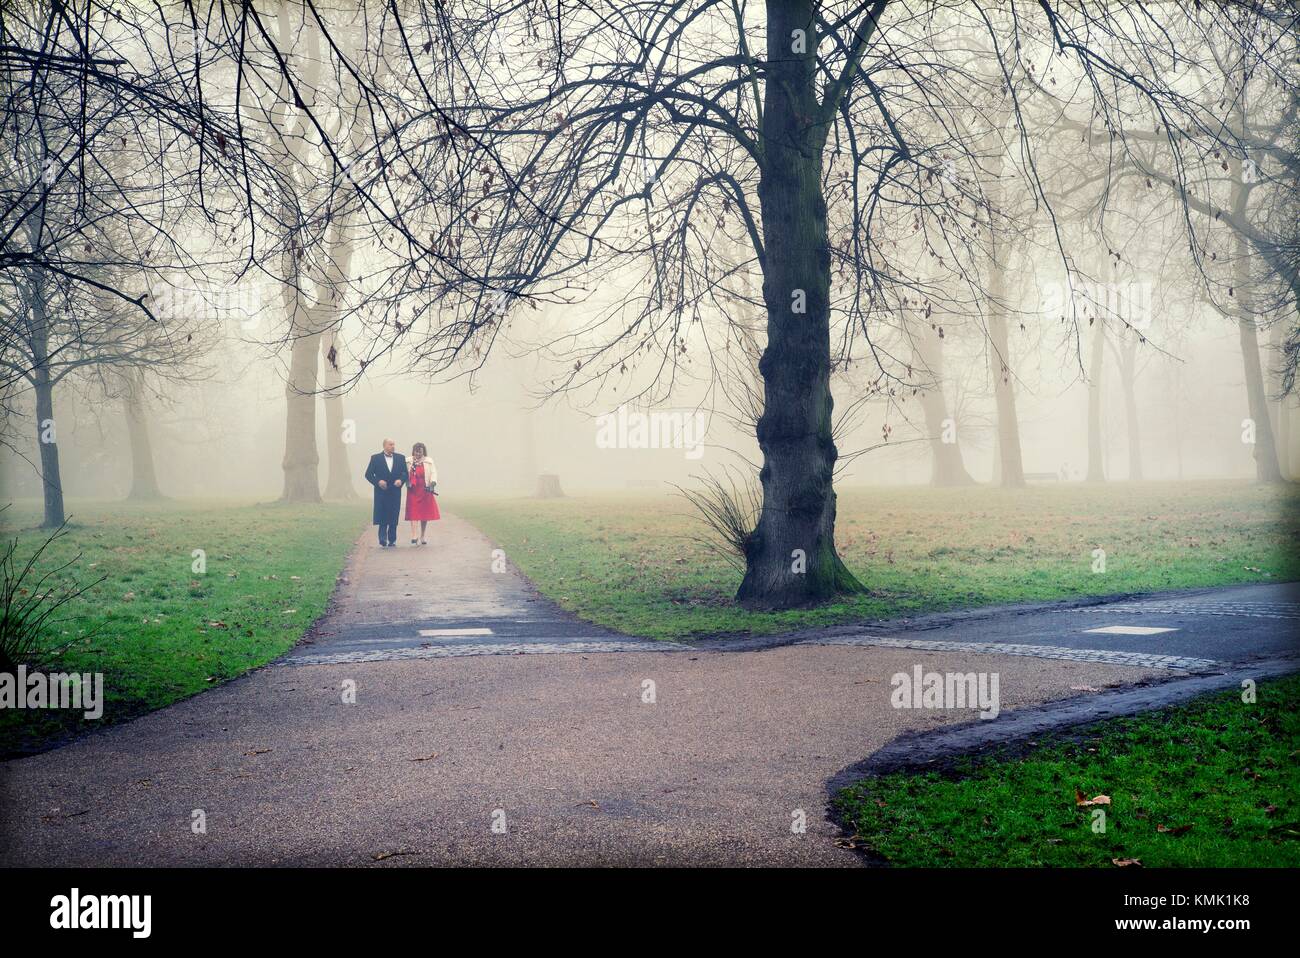 A couple, dressed smartly, walking in Kensington Park Gardens. City of Westminster and Kensington, Chelsea, London, England Stock Photo